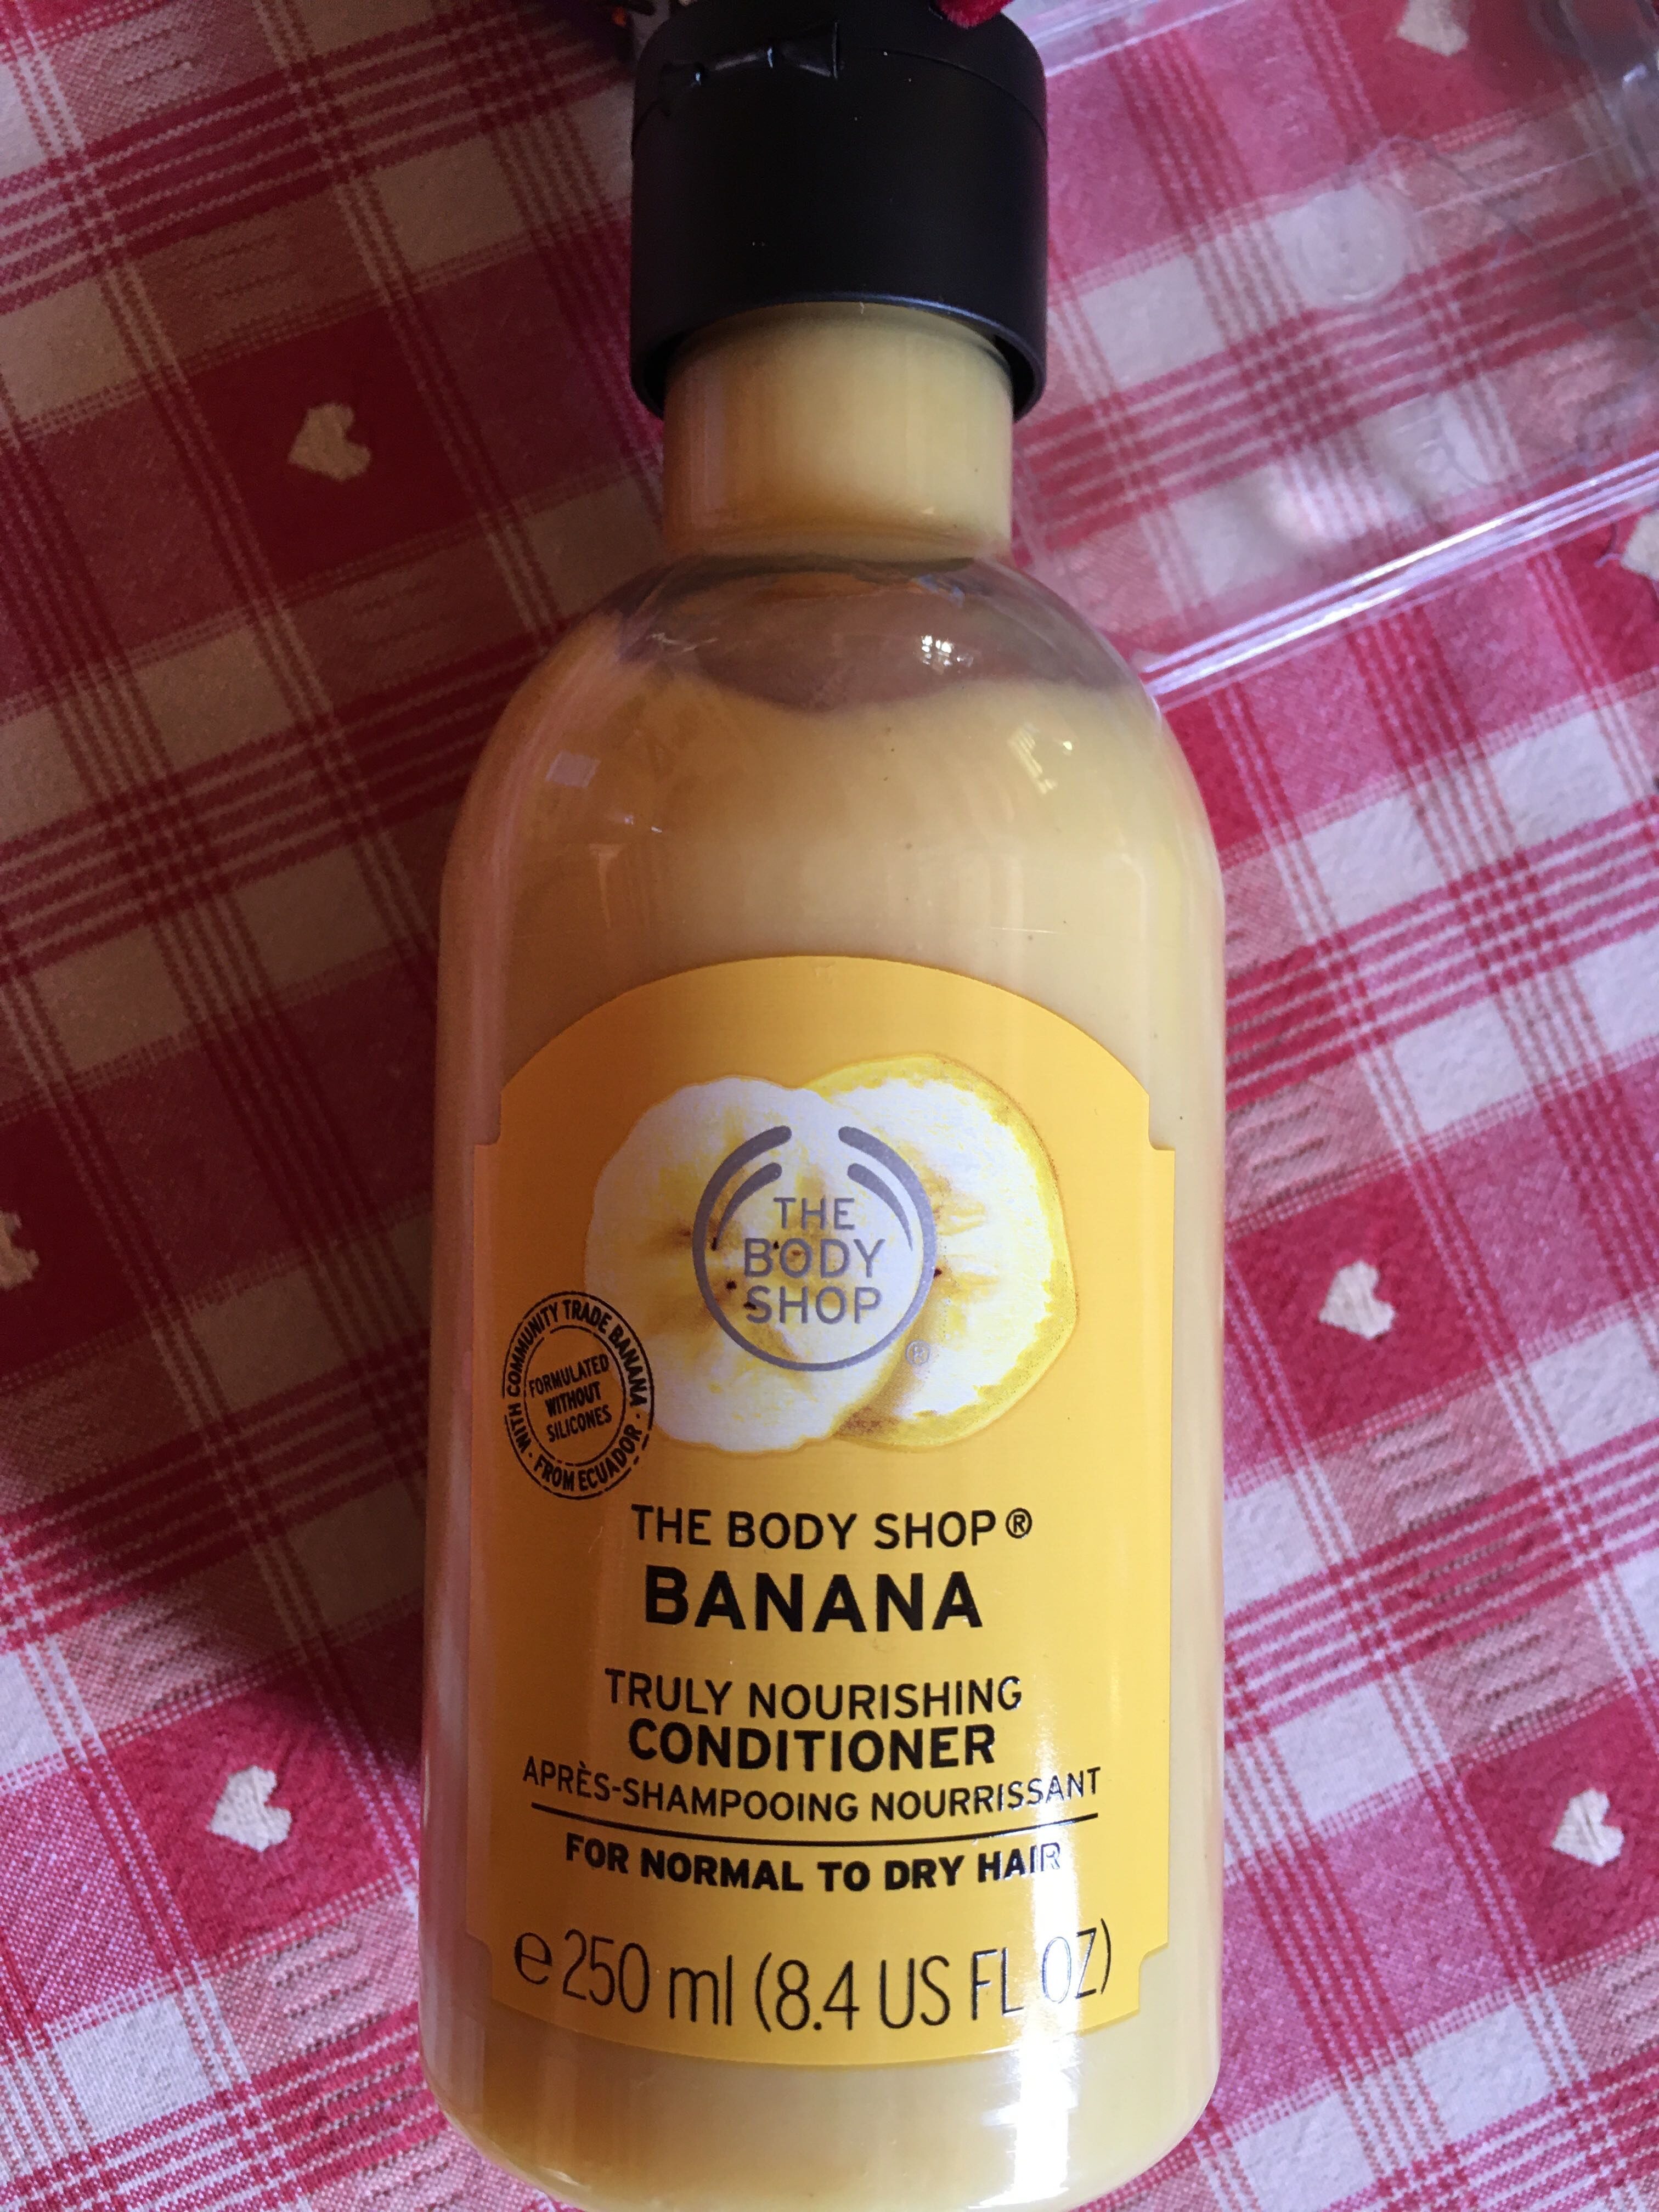 Banane truly nourishing conditionner - Tuote - fr